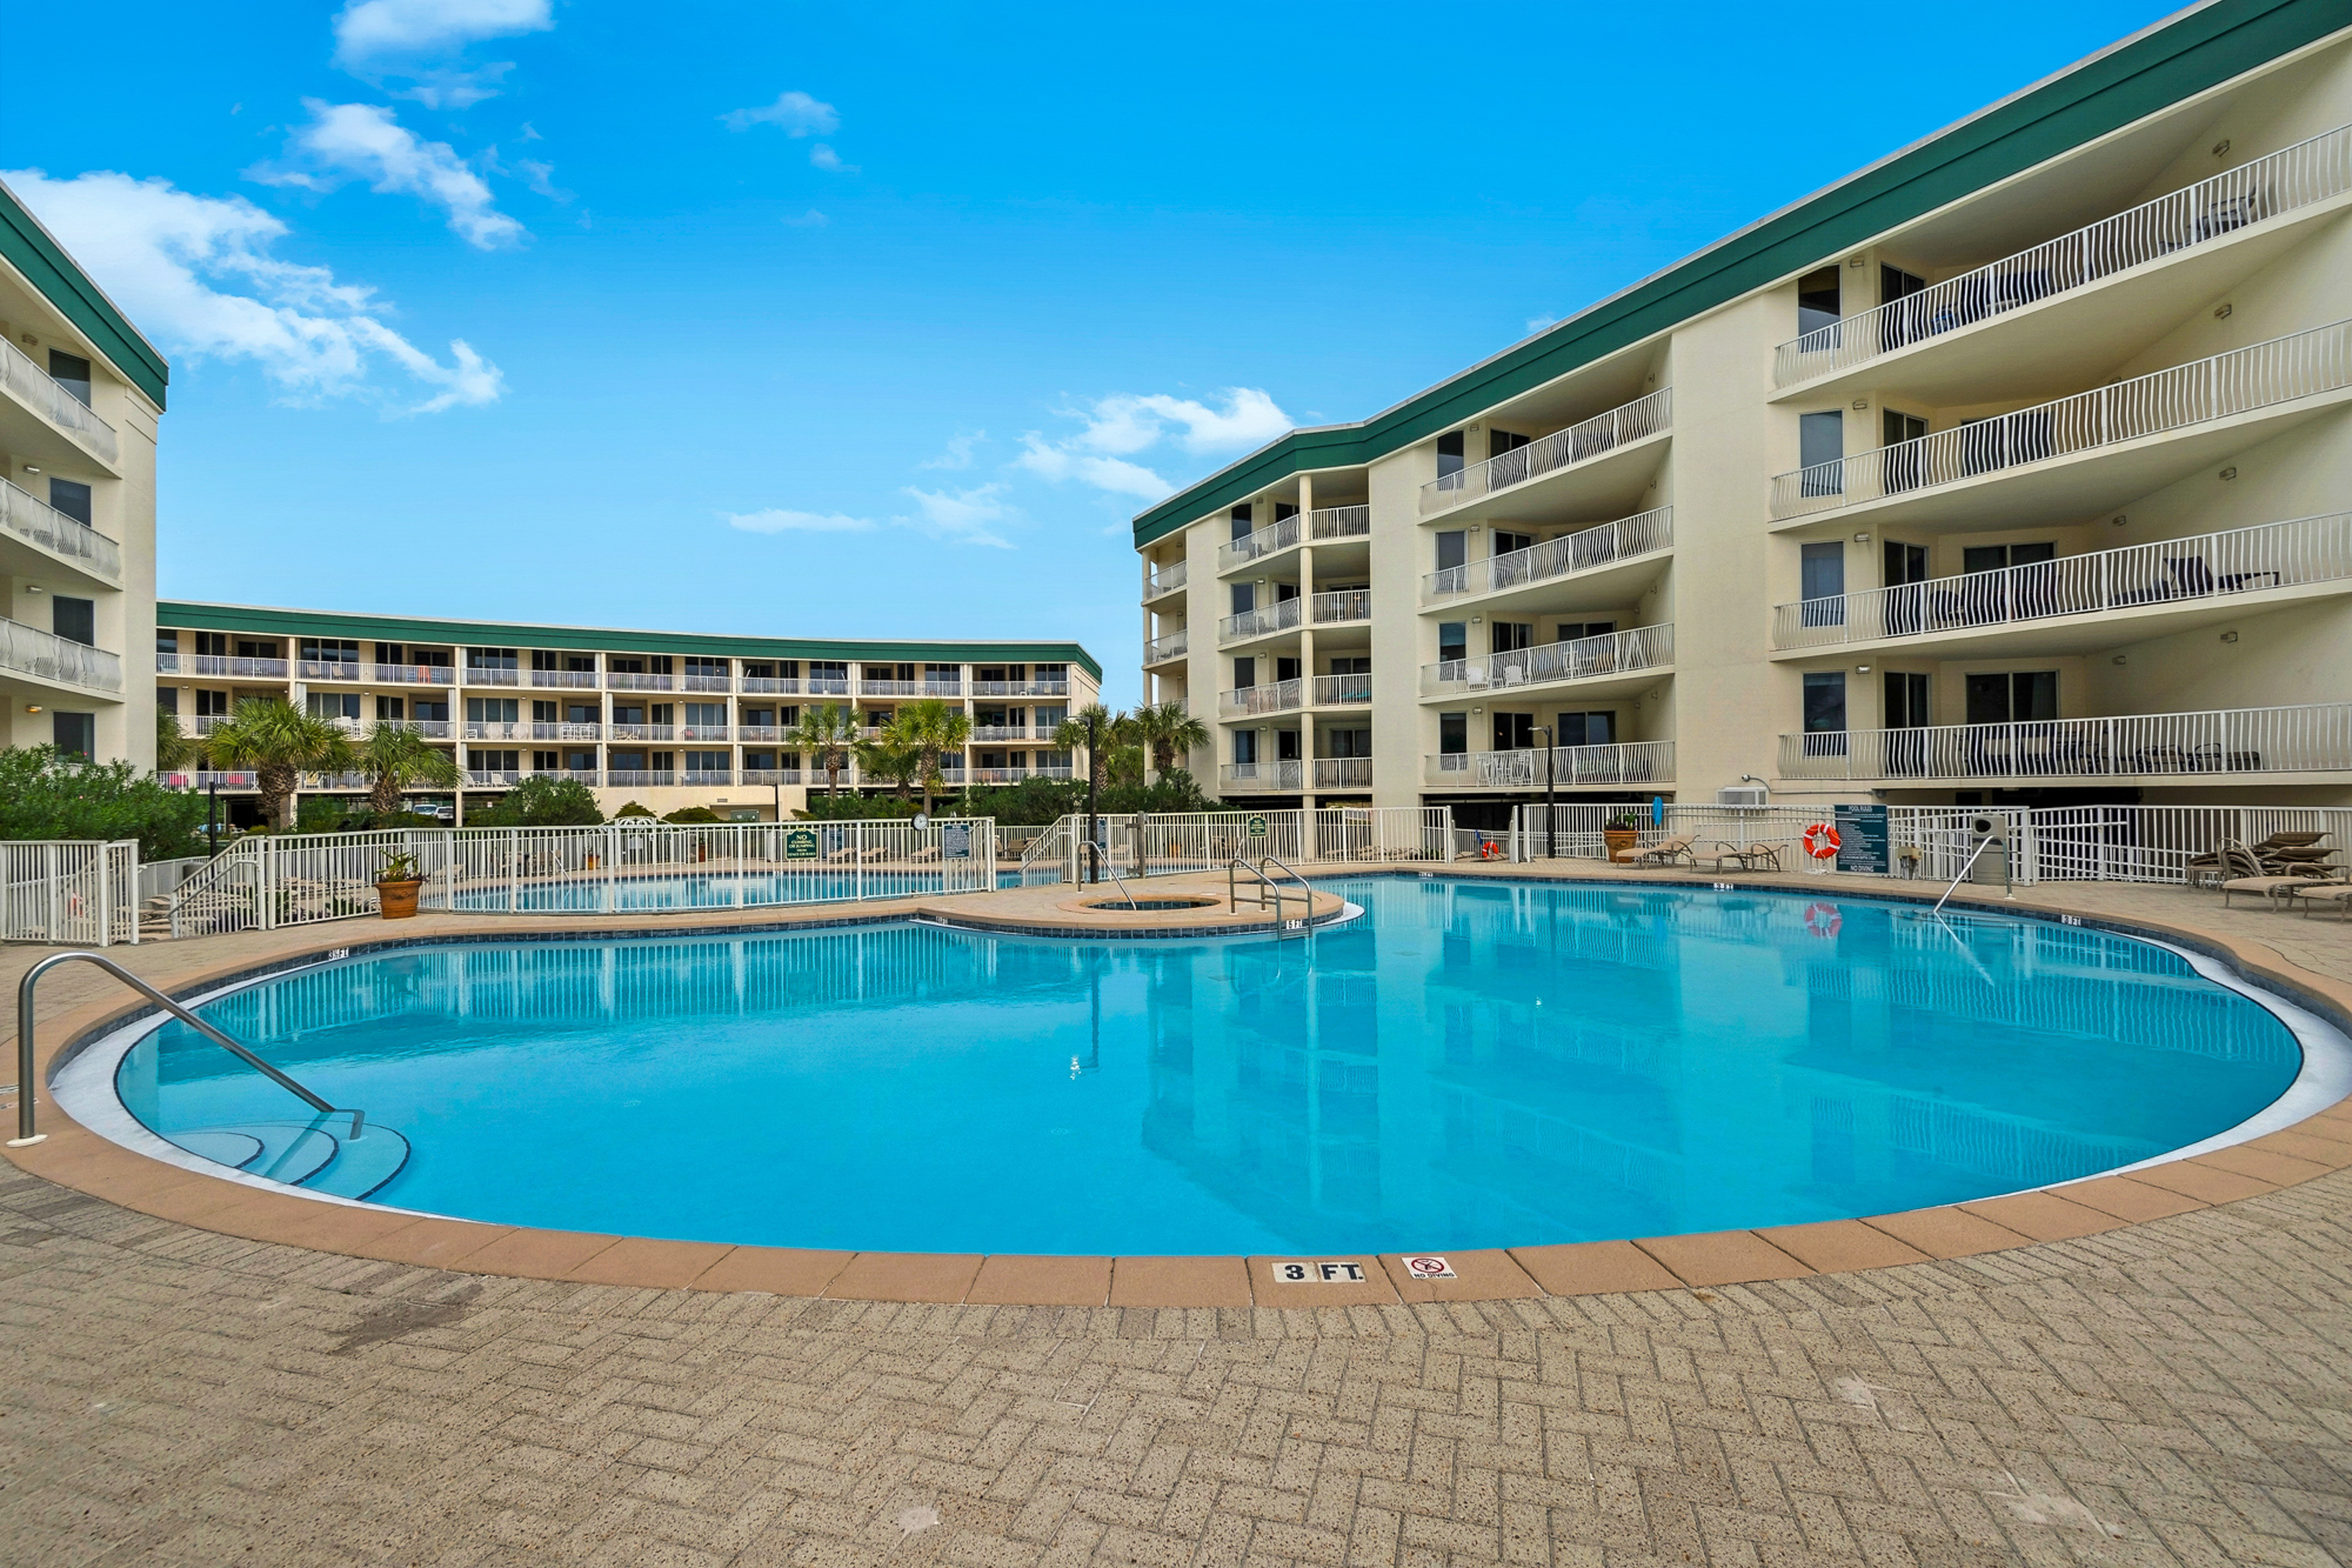 Dunes of Seagrove B305 Condo rental in Dunes of Seagrove in Highway 30-A Florida - #42